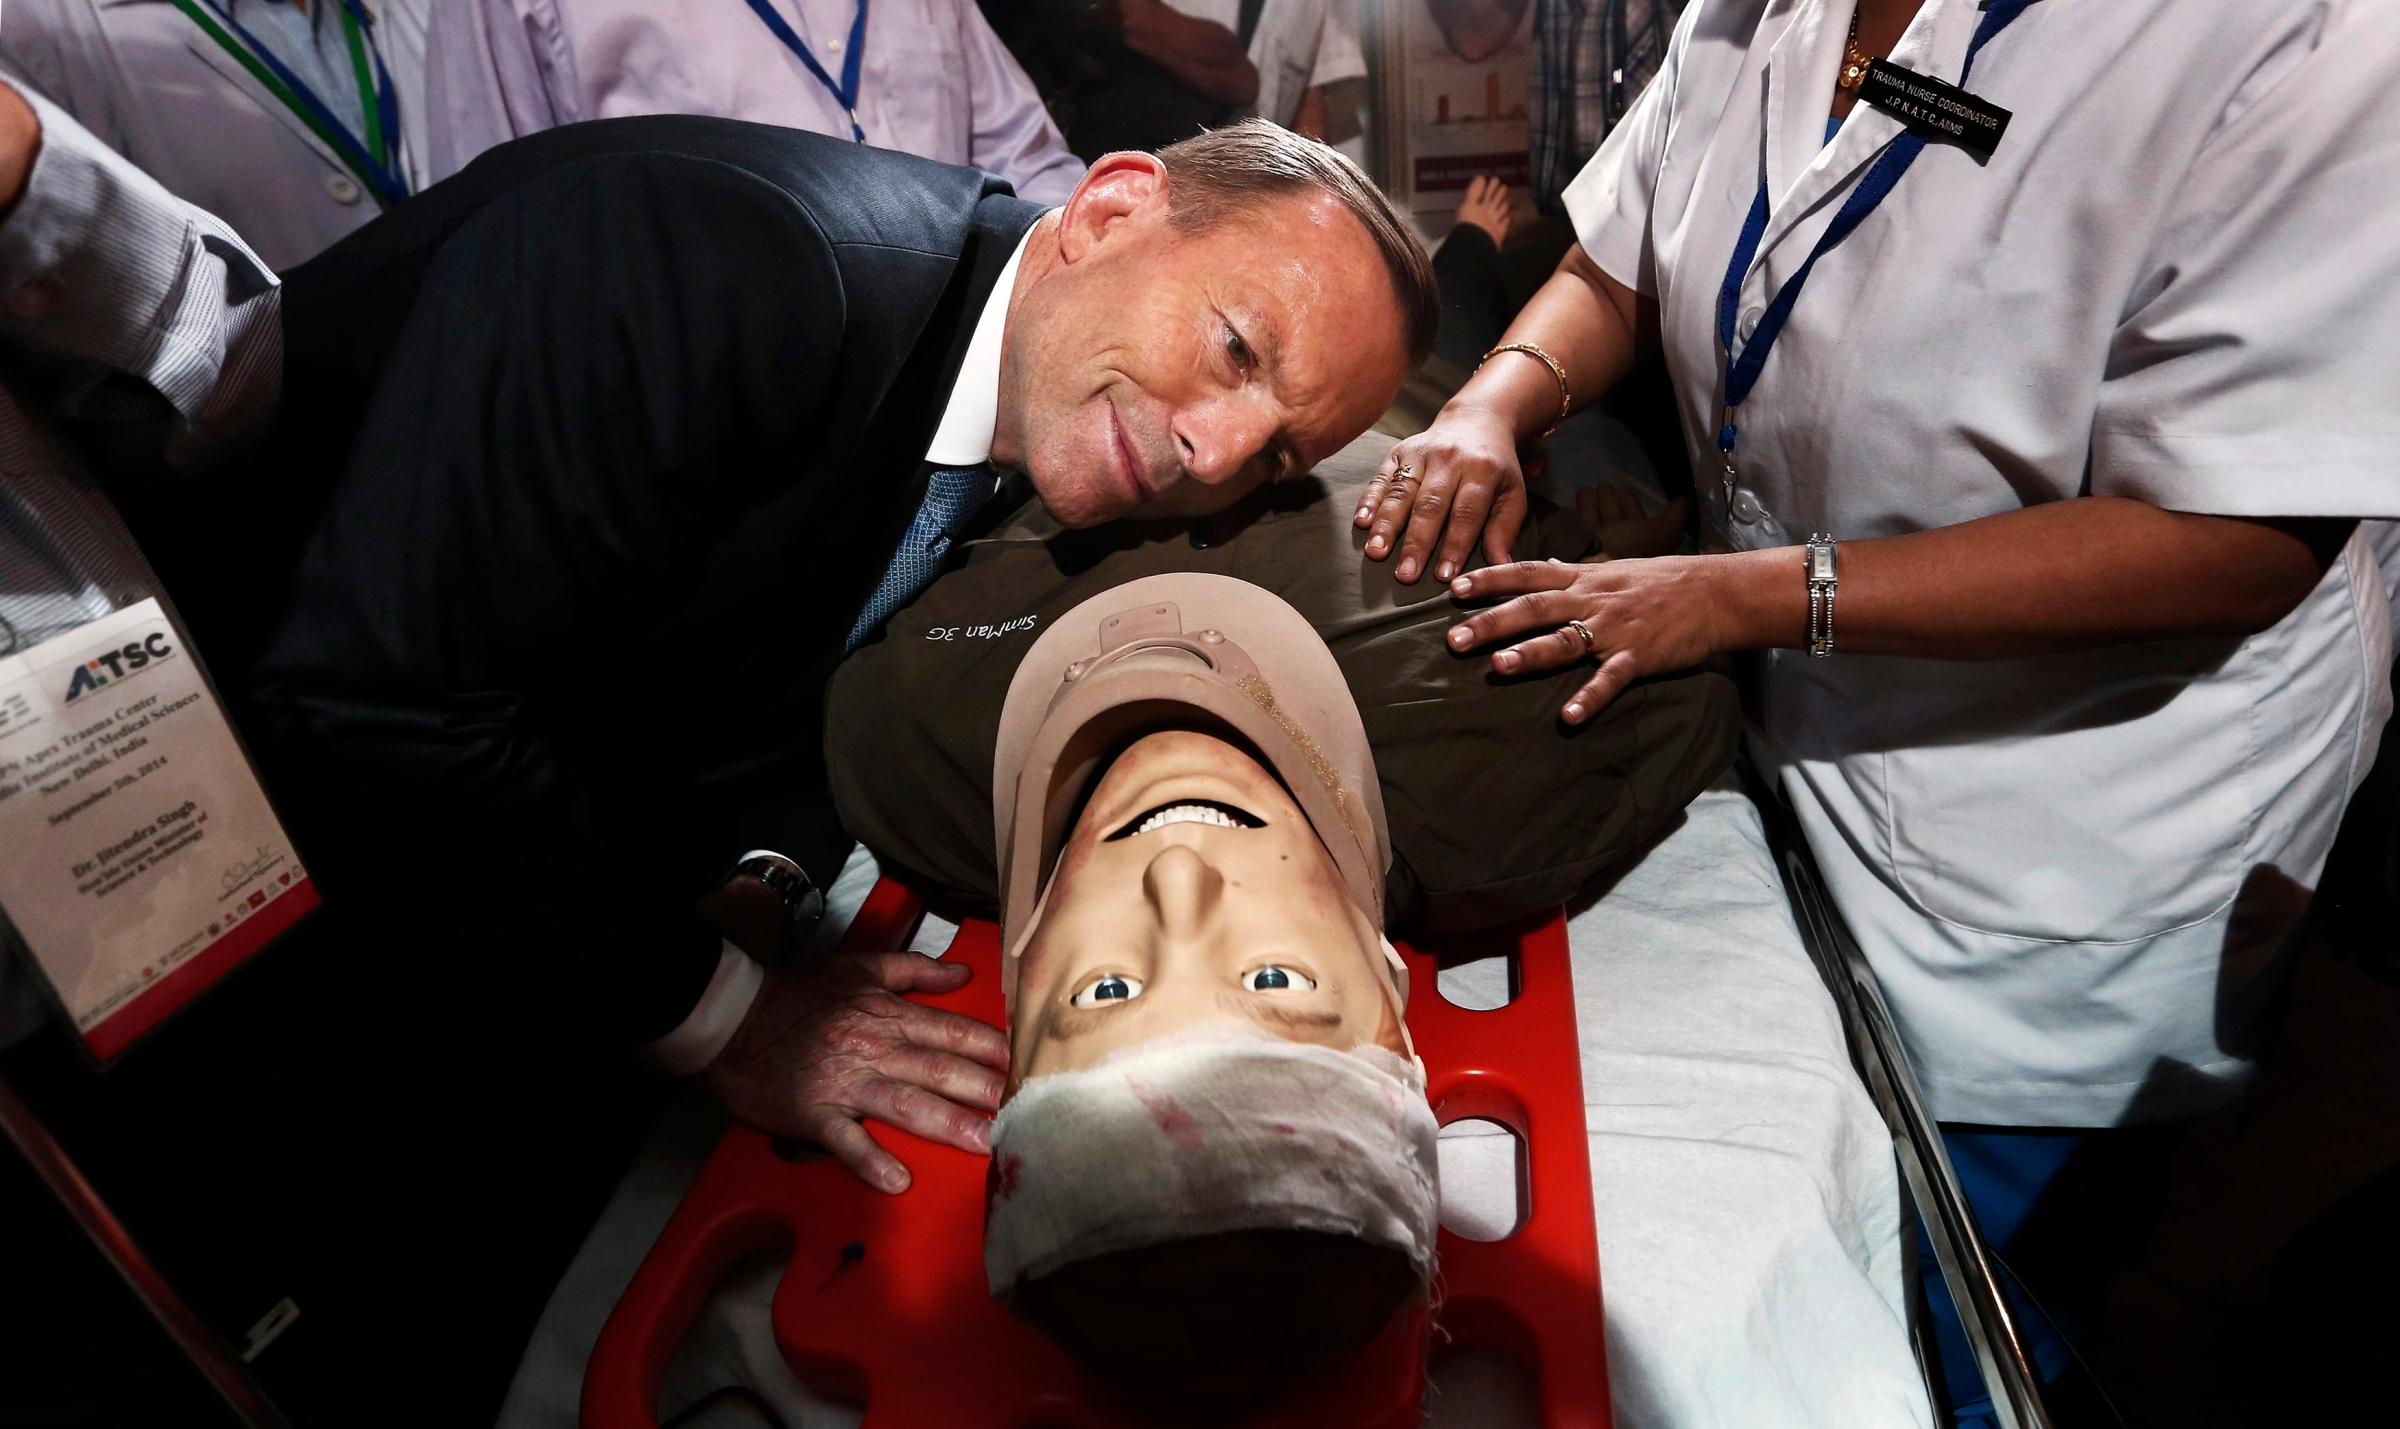 Australian Prime Minister Tony Abbott takes part in a presentation with a patient simulator during his visit to the trauma centre of the All India Institutes of Medical Sciences in New Delhi on Sept. 5, 2014.